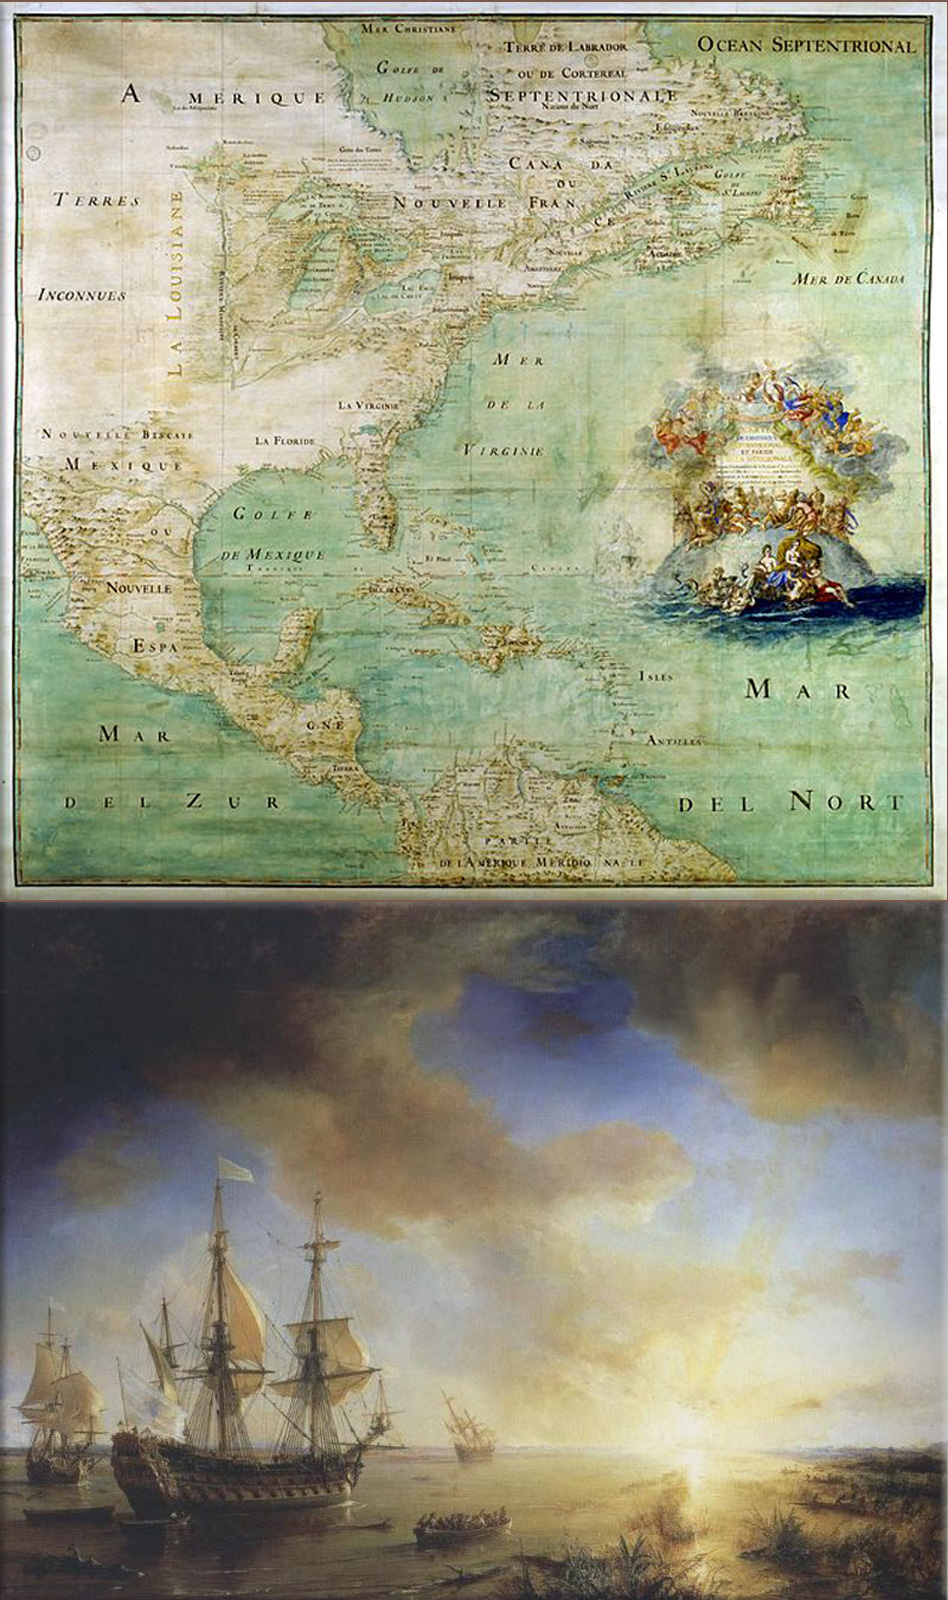 La Salle's Expedition to Louisiana in 1684, painted in 1844 by Theodore Gudin. La Belle is on the left, Le Joly is in the middle, and L'Aimable is grounded on the right